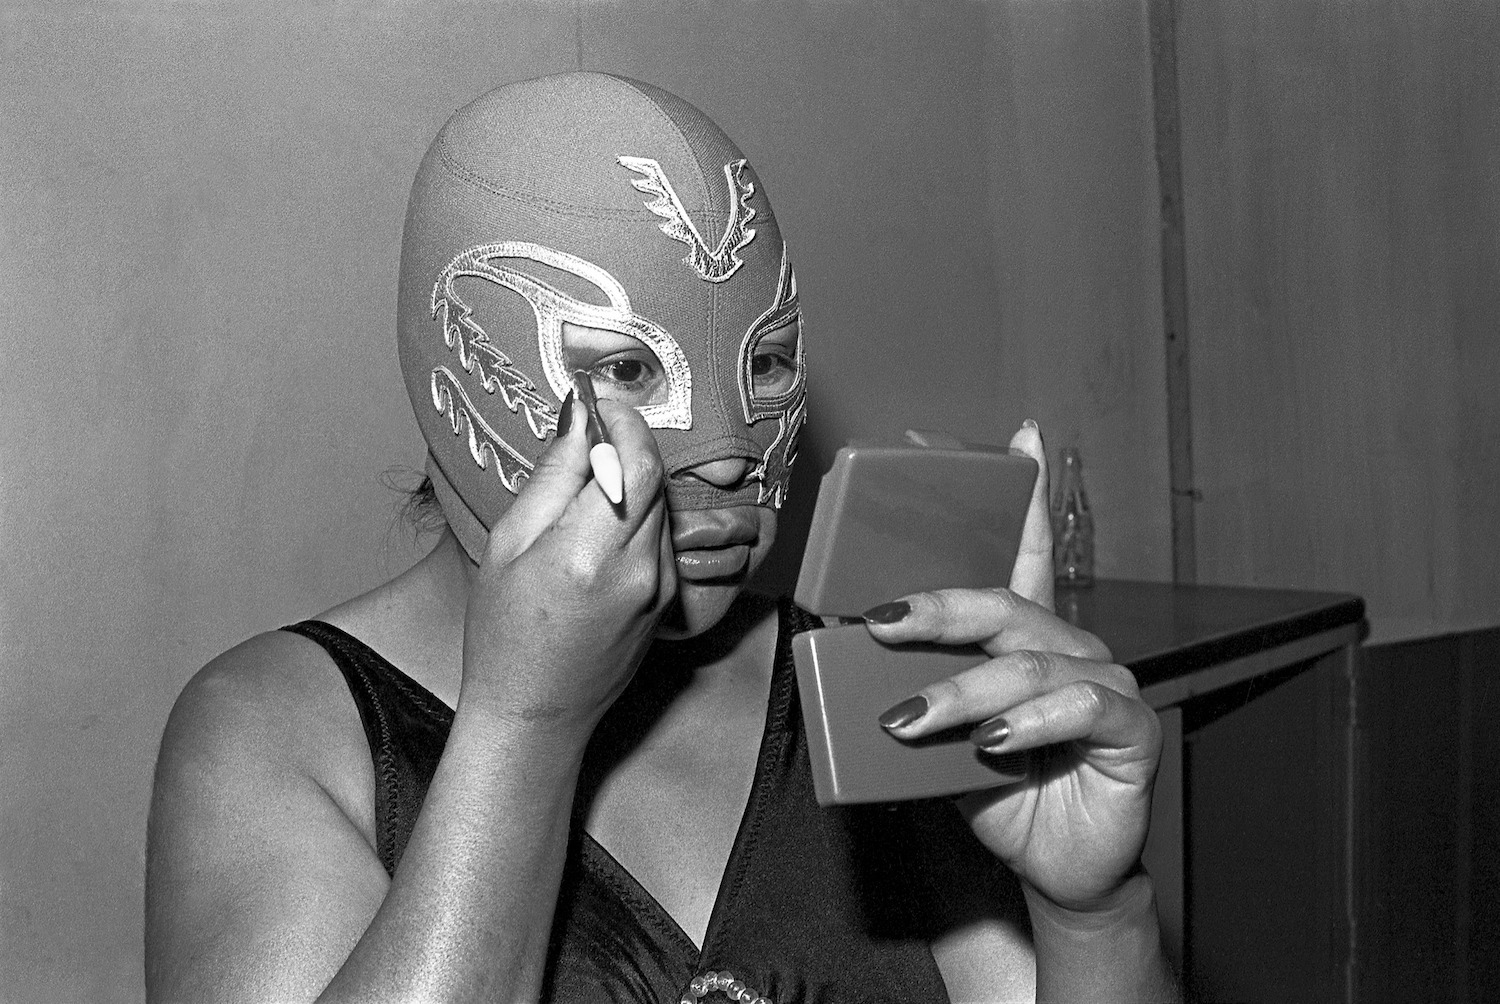 Lucha/Libre: Lourdes Grobet and the radical reframing of 20th-century Mexico - AWARE Artistes femmes / women artists